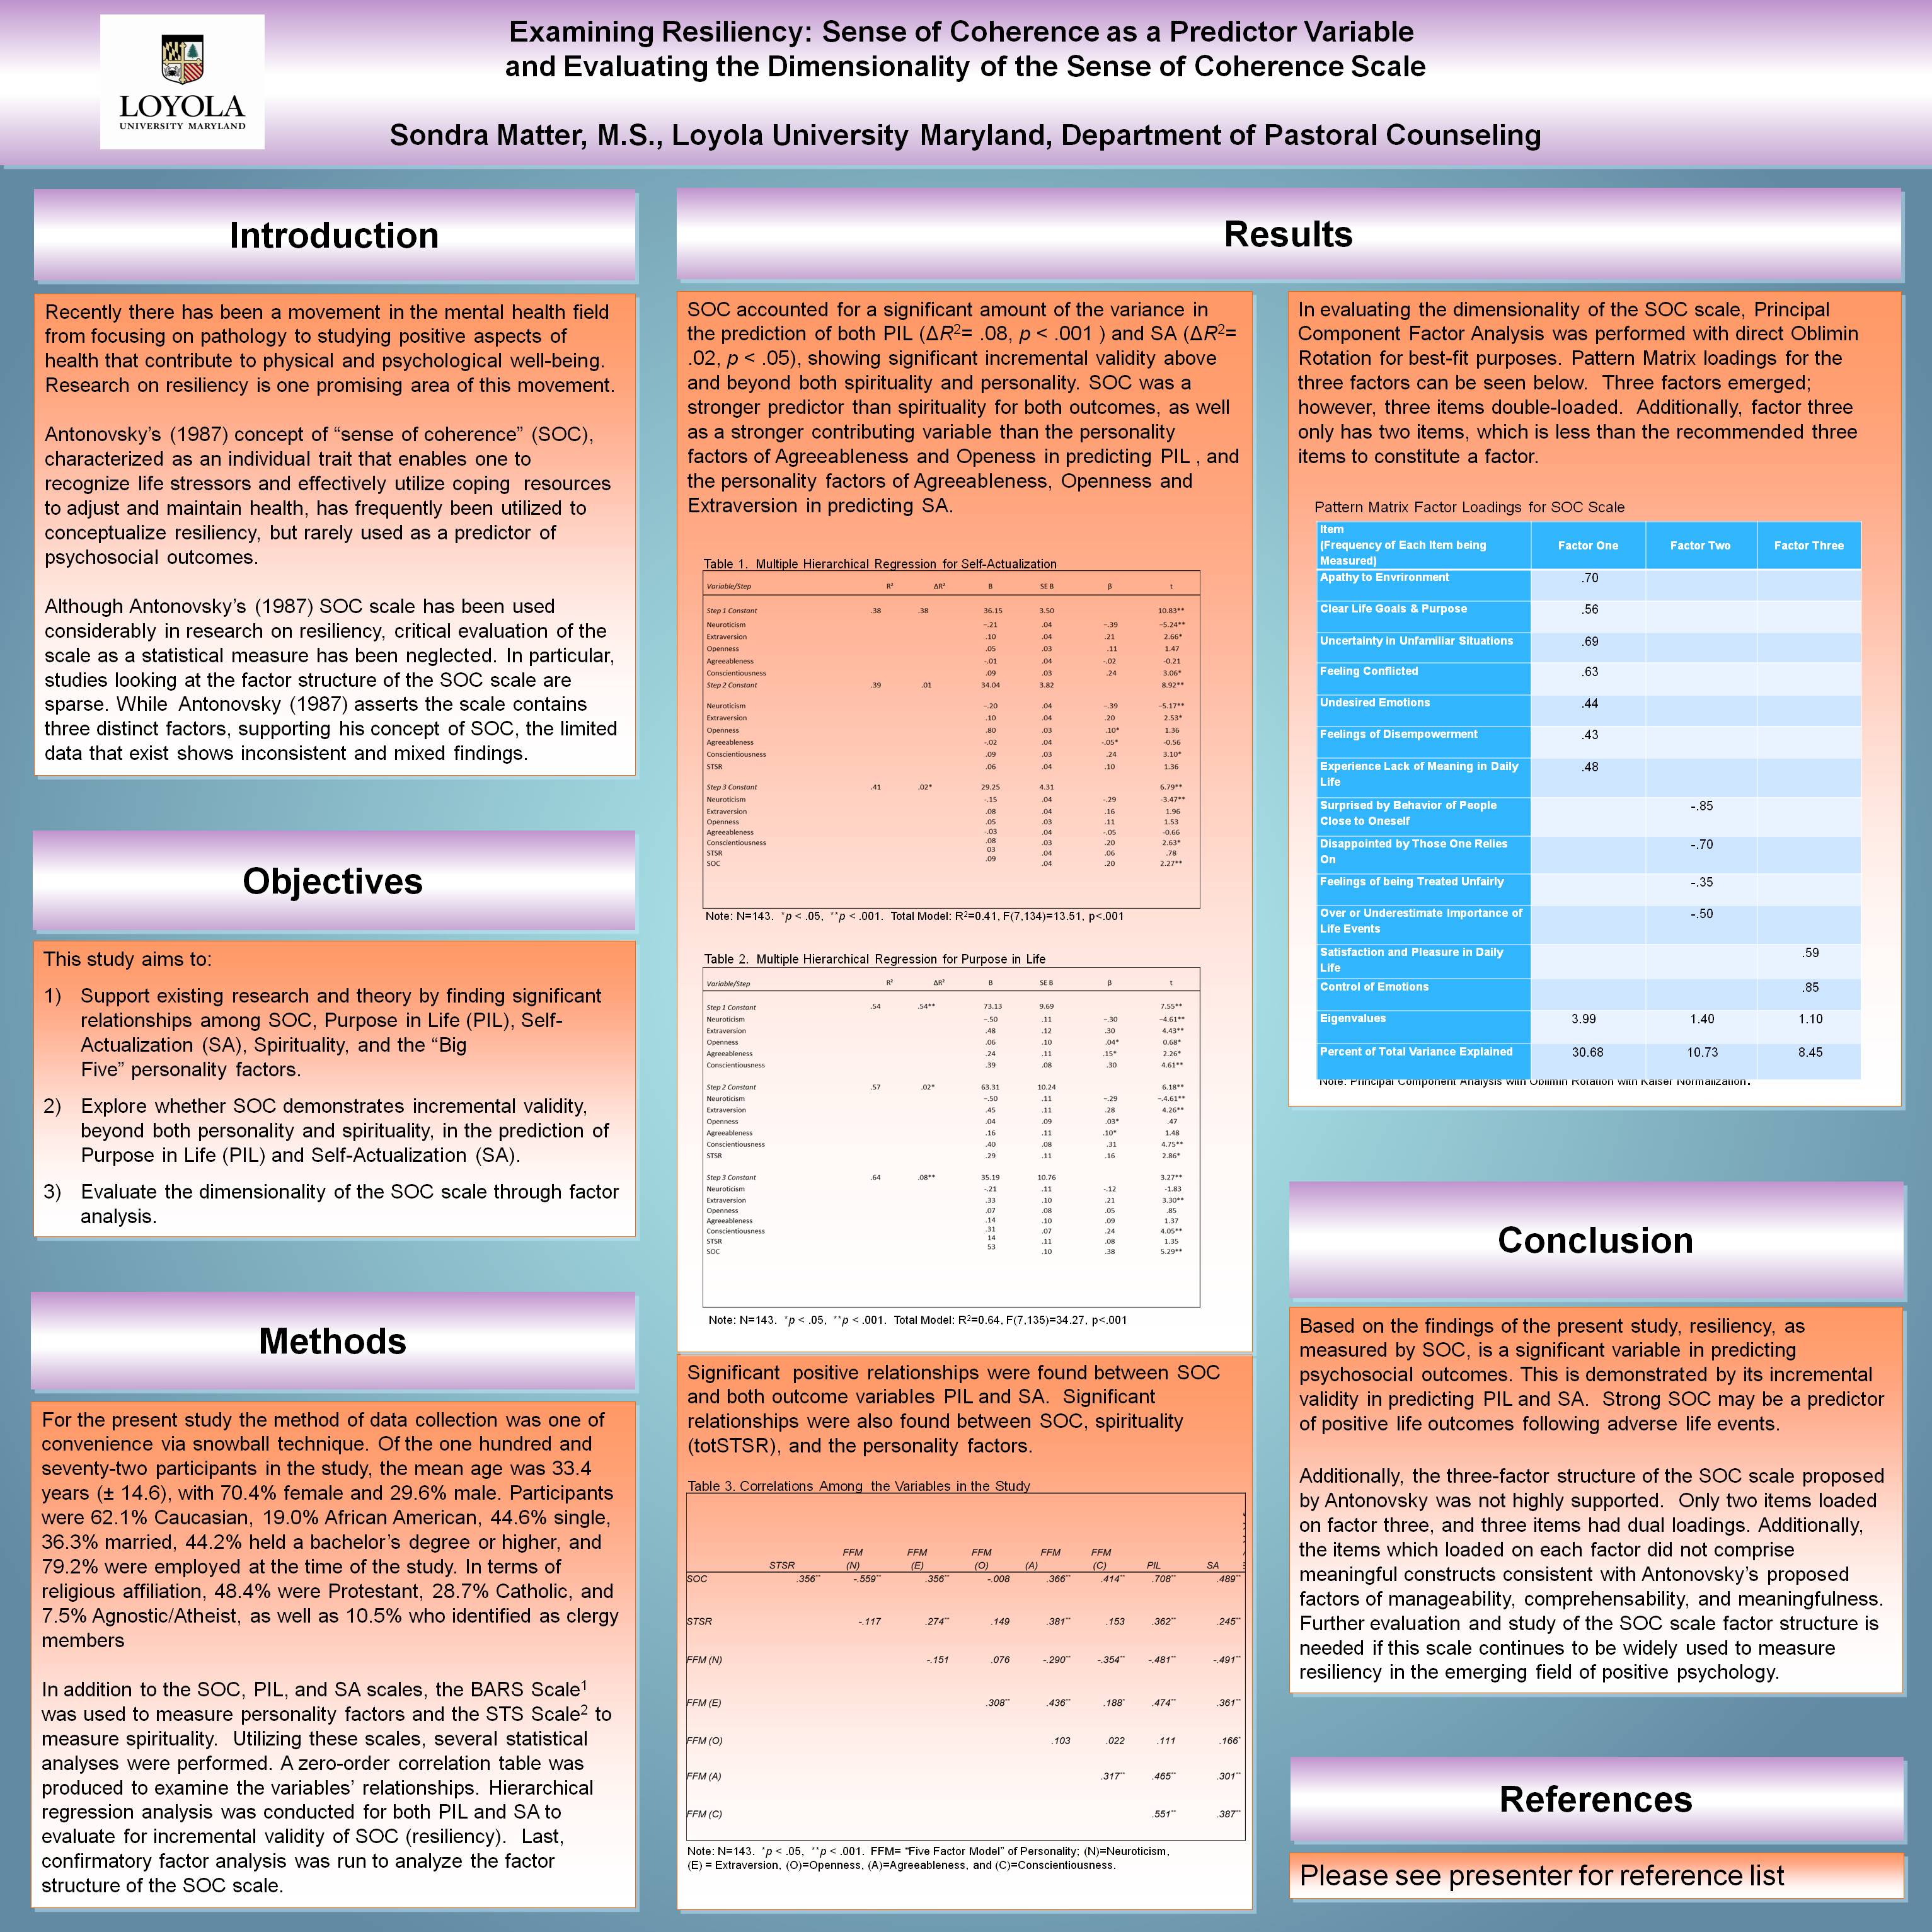 Poster image: Examining Resiliency: Sense of Coherence as a Predictor Variable and Evaluating the Dimensionality of the Sense of Coherence Scale